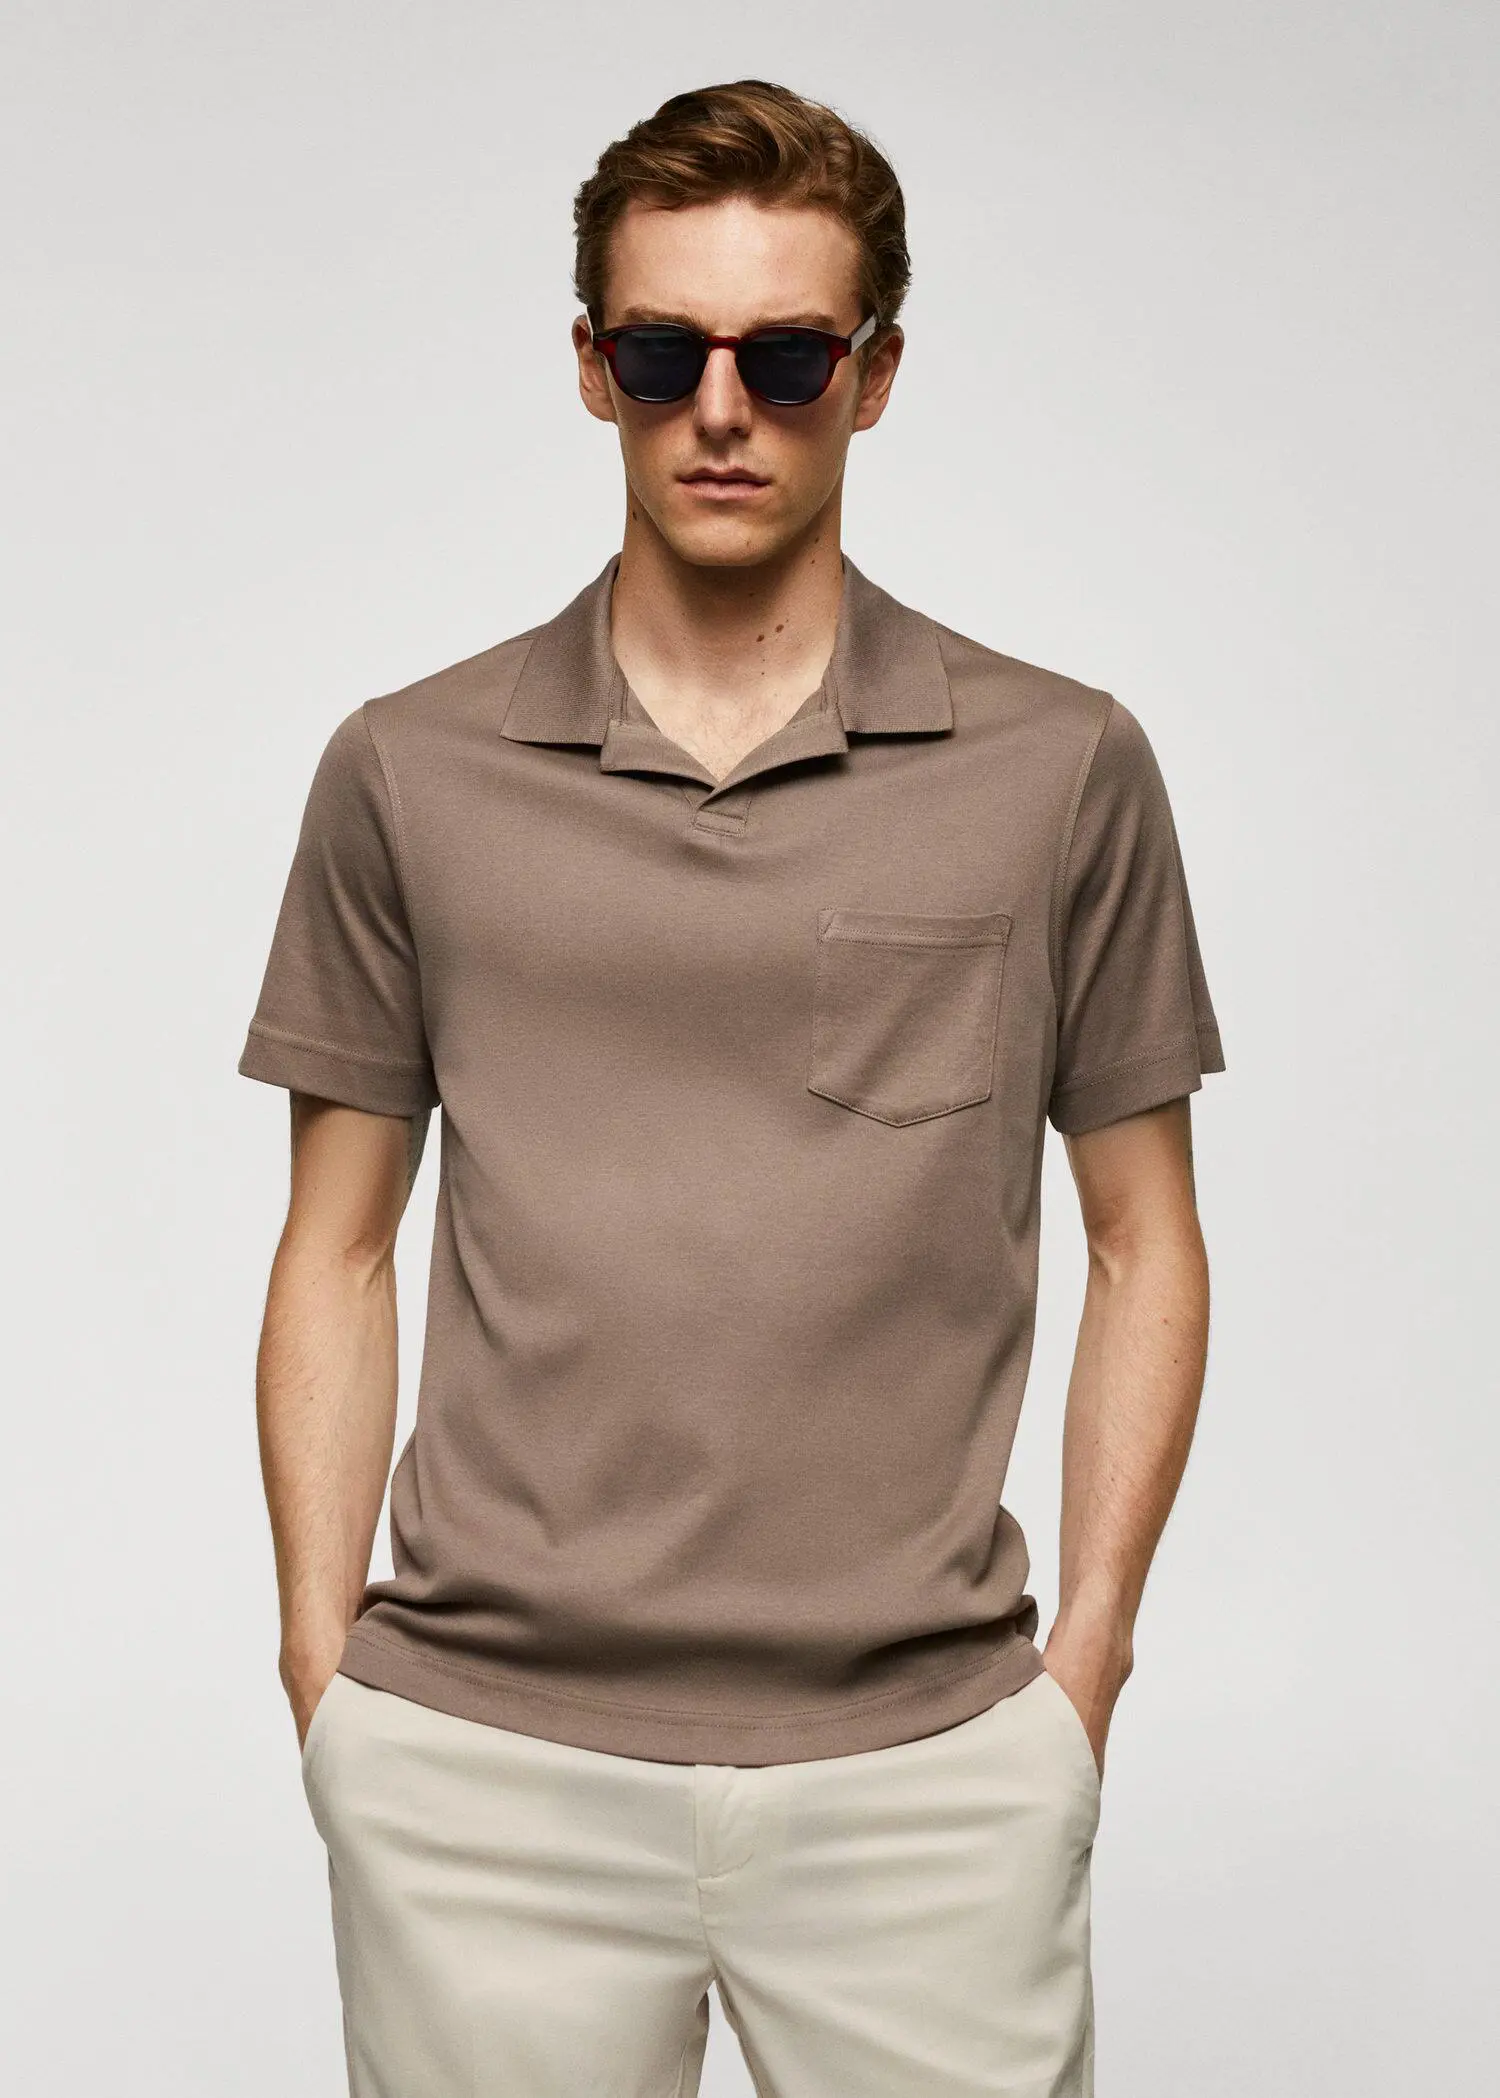 Mango 100% cotton polo shirt with pocket. a man wearing a brown shirt and sunglasses. 